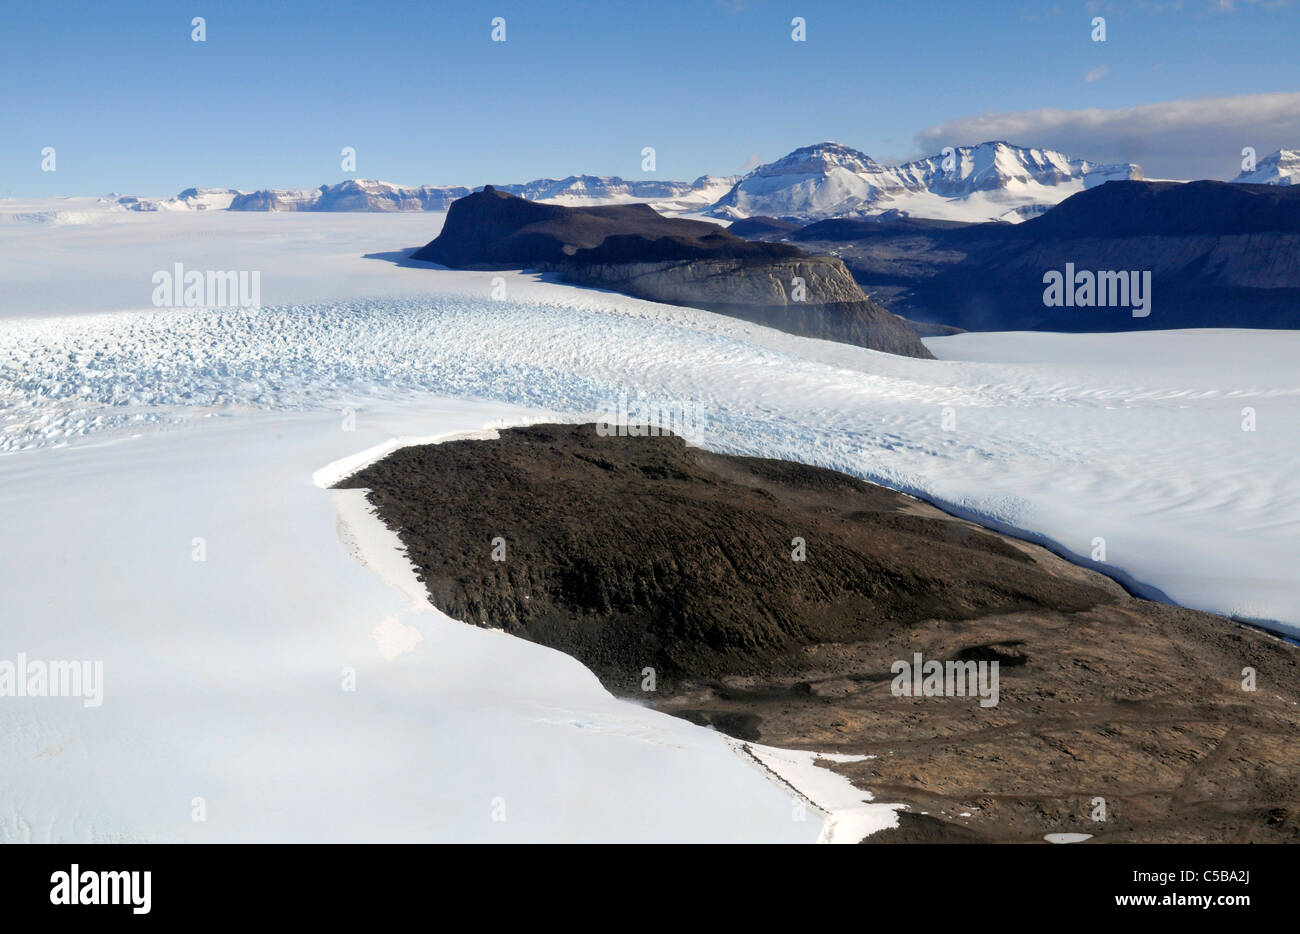 View from upper Taylor Glacier over Cavendish Rocks looking north towards the Asgard Range, McMurdo Dry Valleys, Antarctica Stock Photo